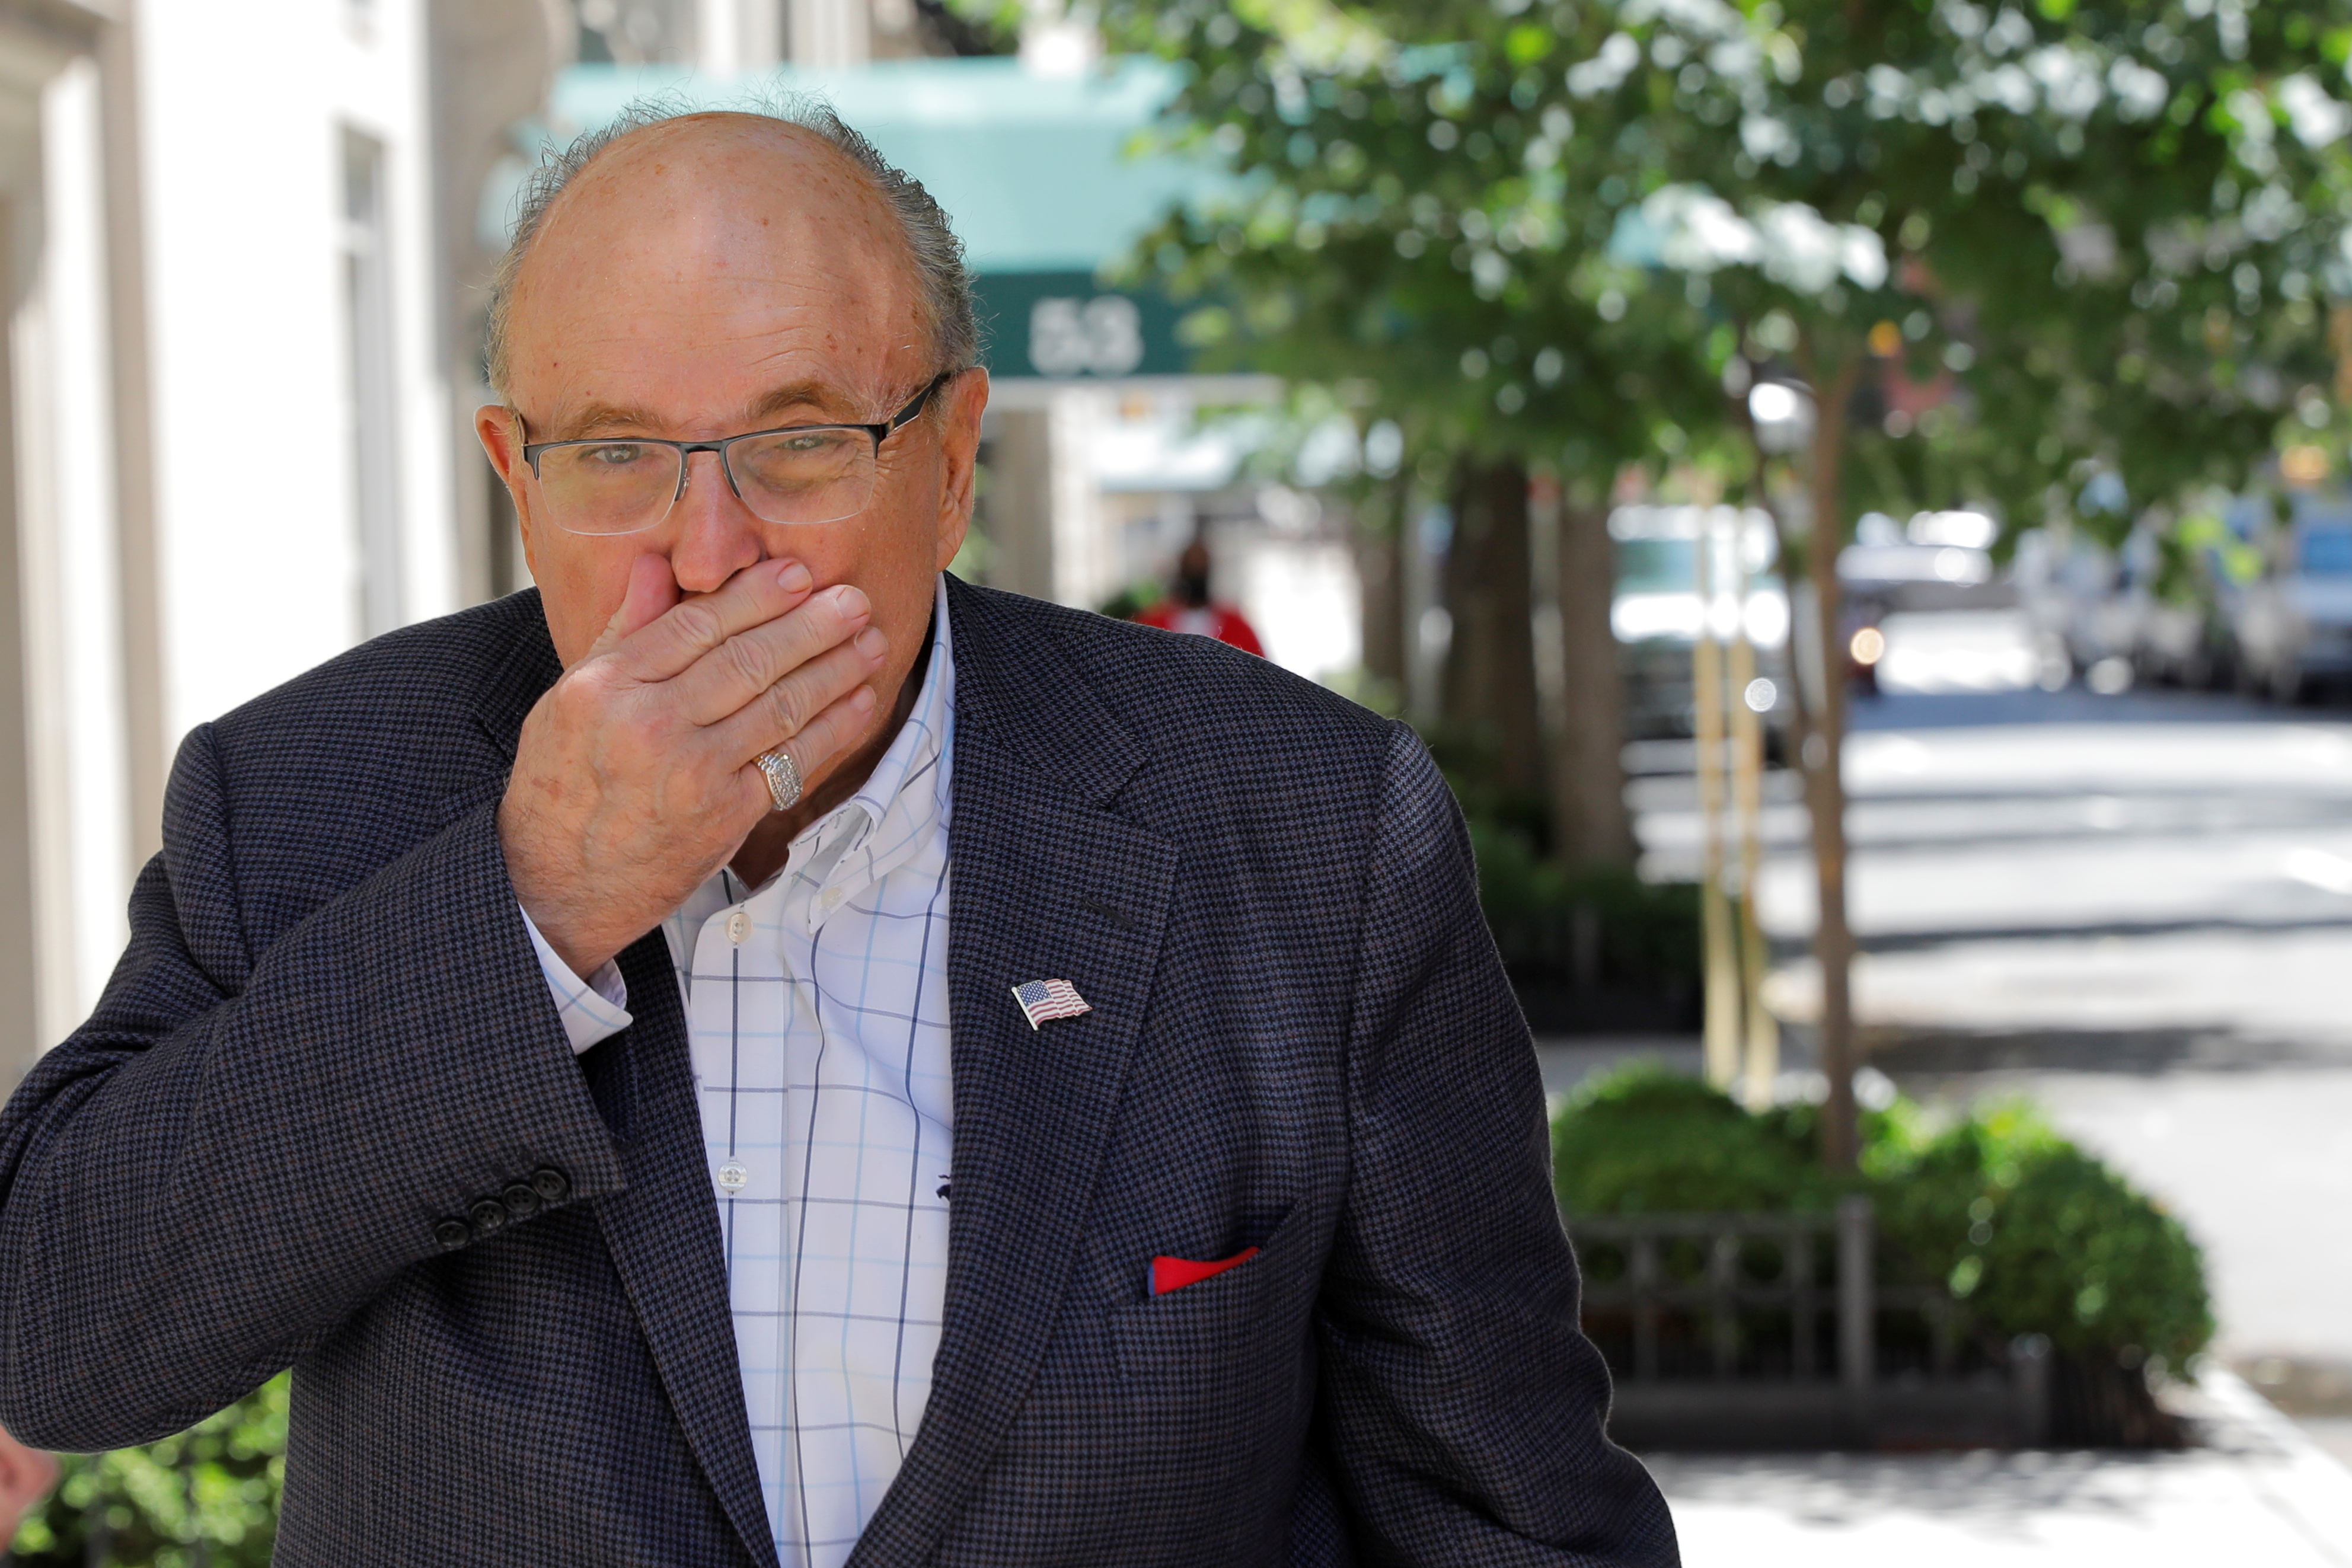 Former New York City Mayor Rudy Giuliani arrives at his apartment building after the suspension of his law license in Manhattan in New York City